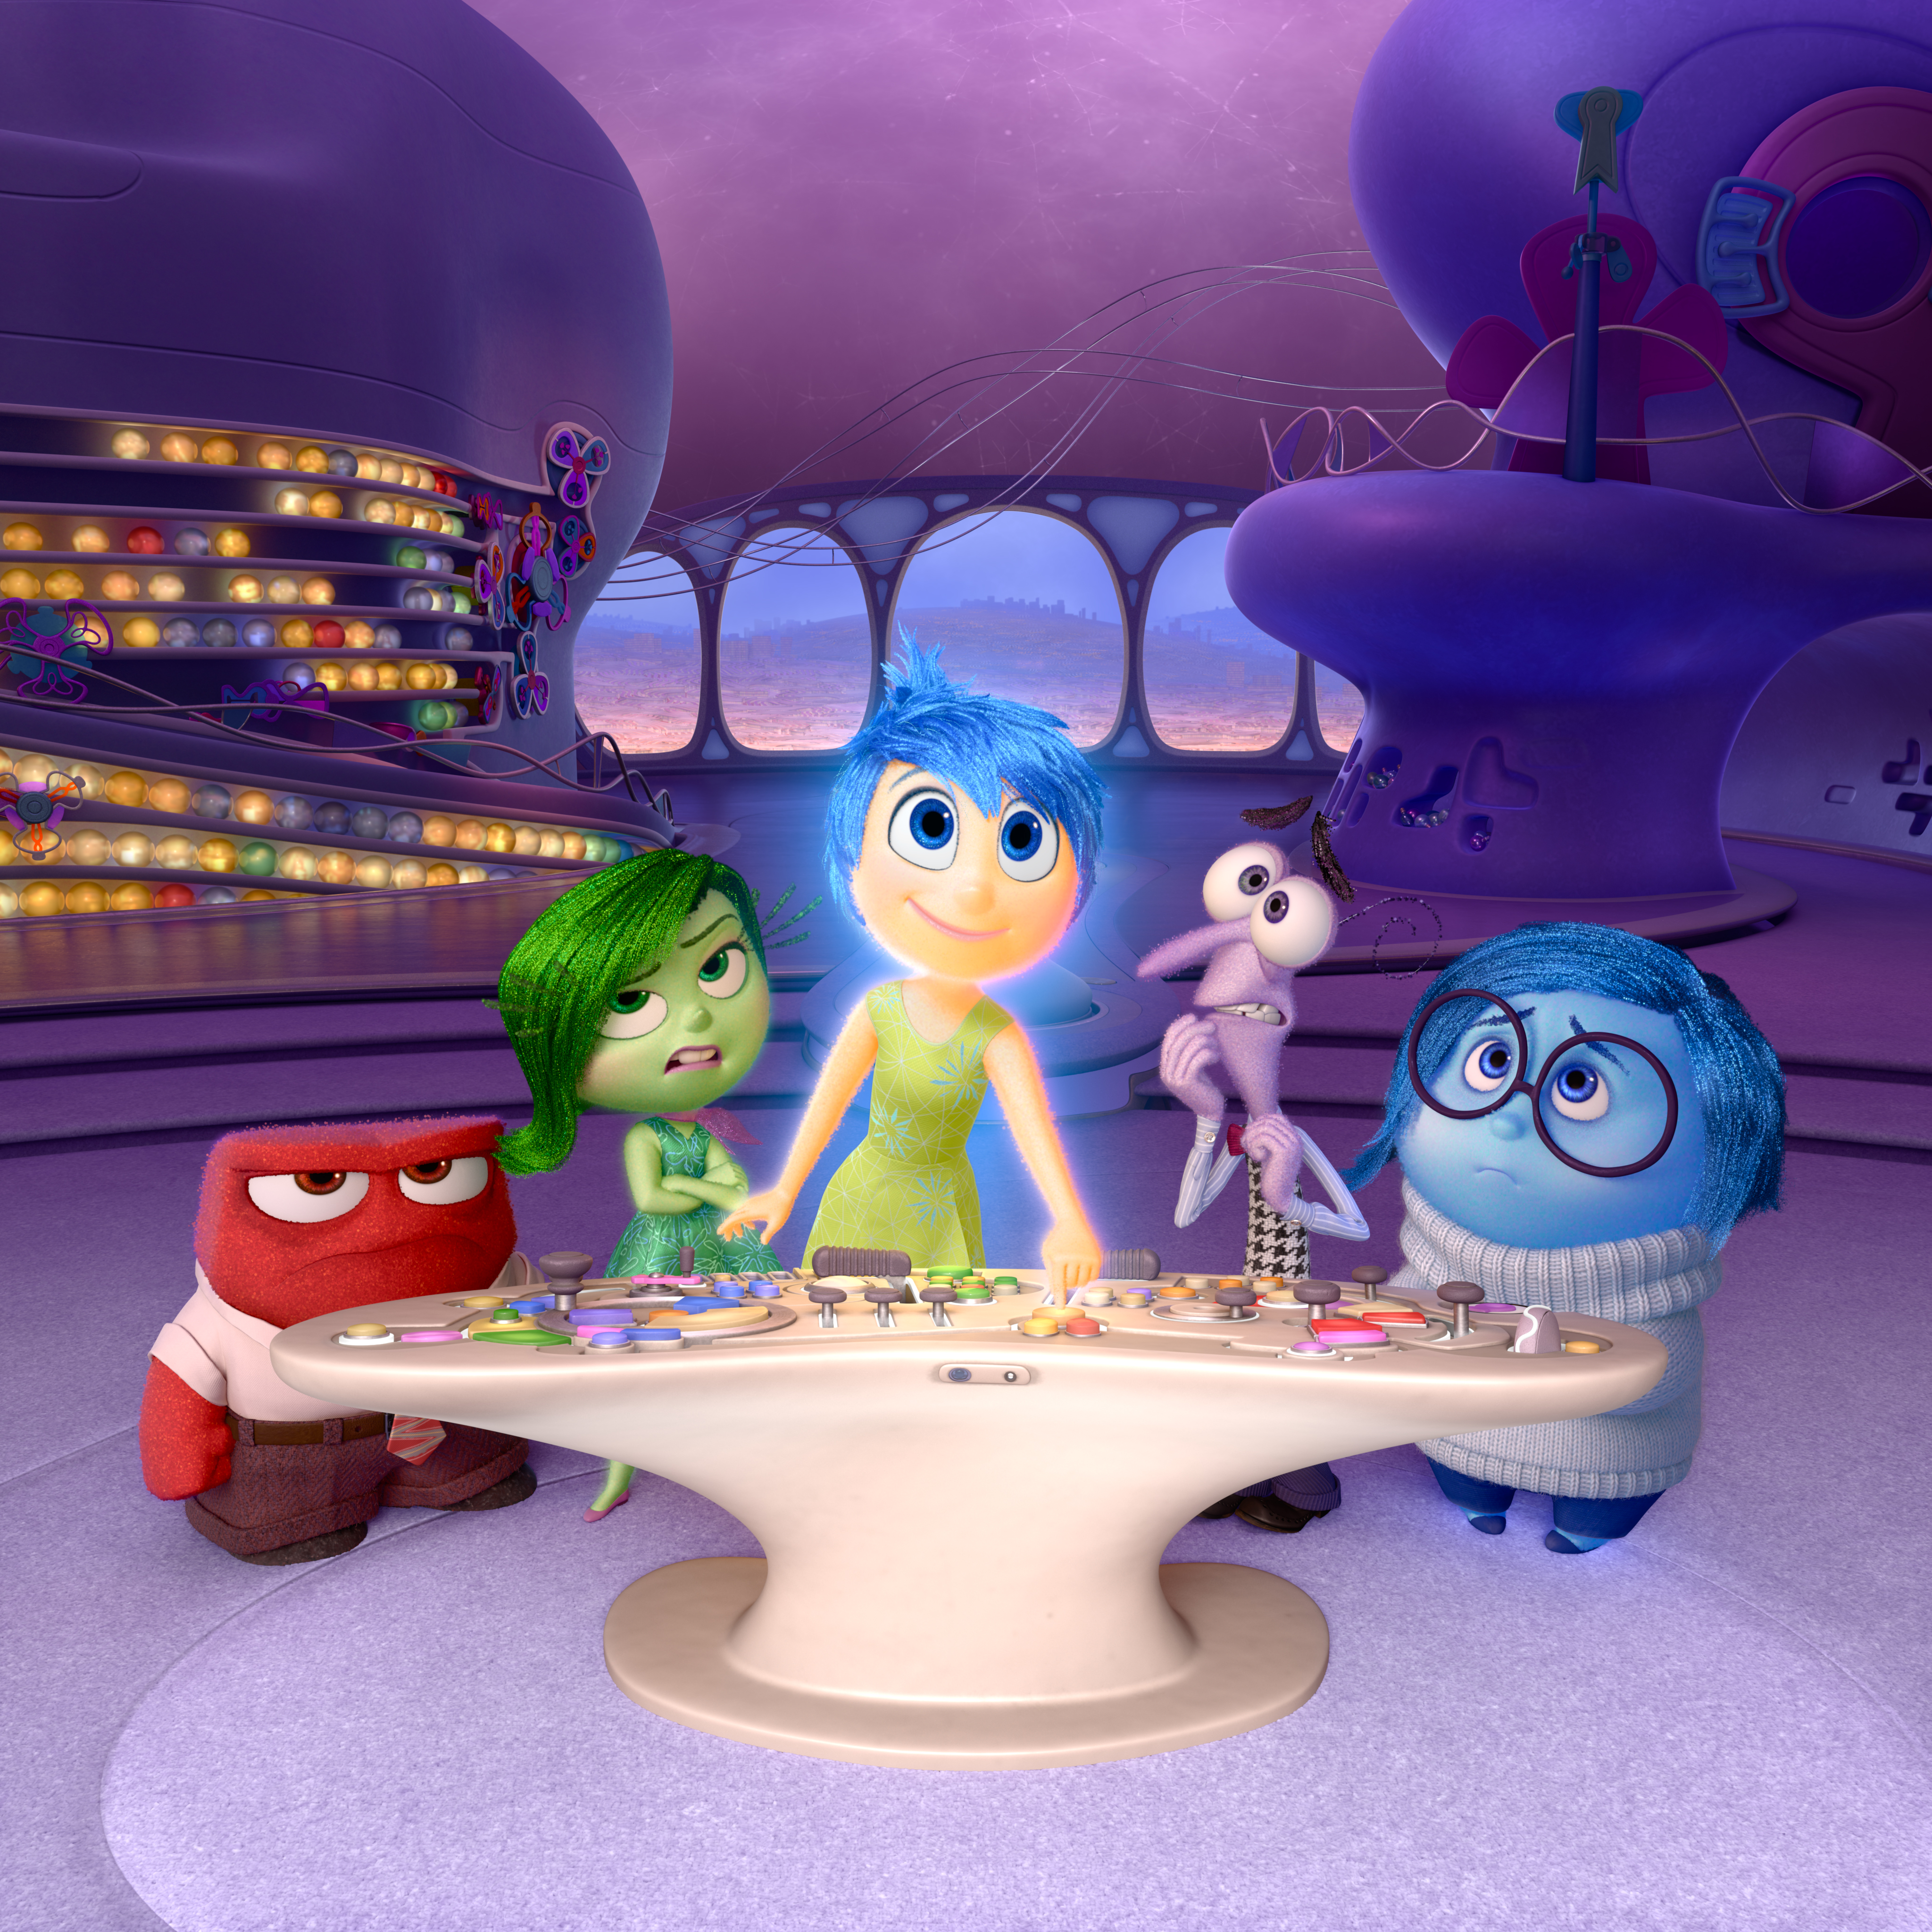 Inside out images